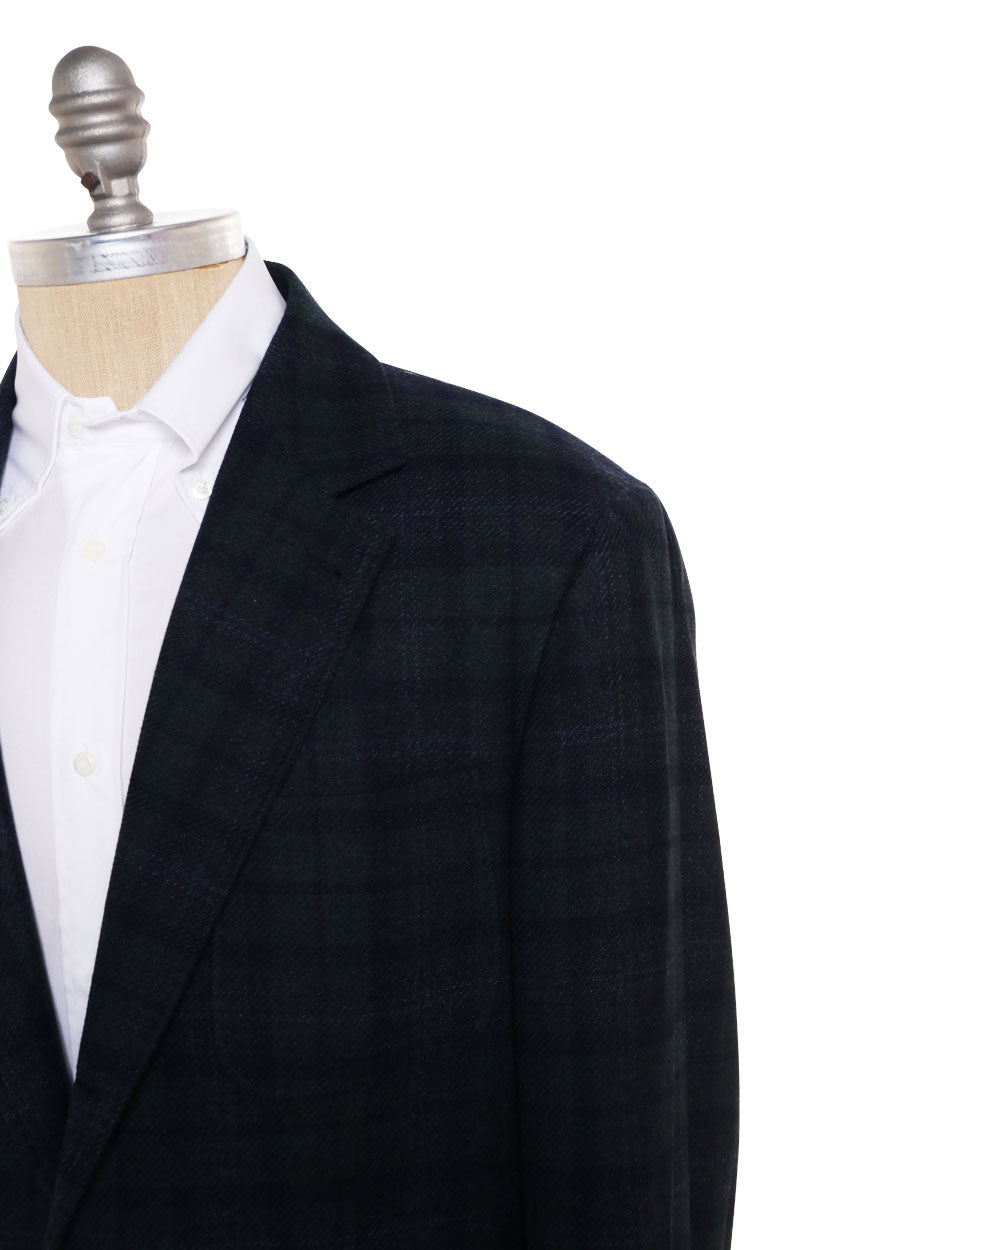 Navy and Verde Wool Blend Plaid Sportcoat